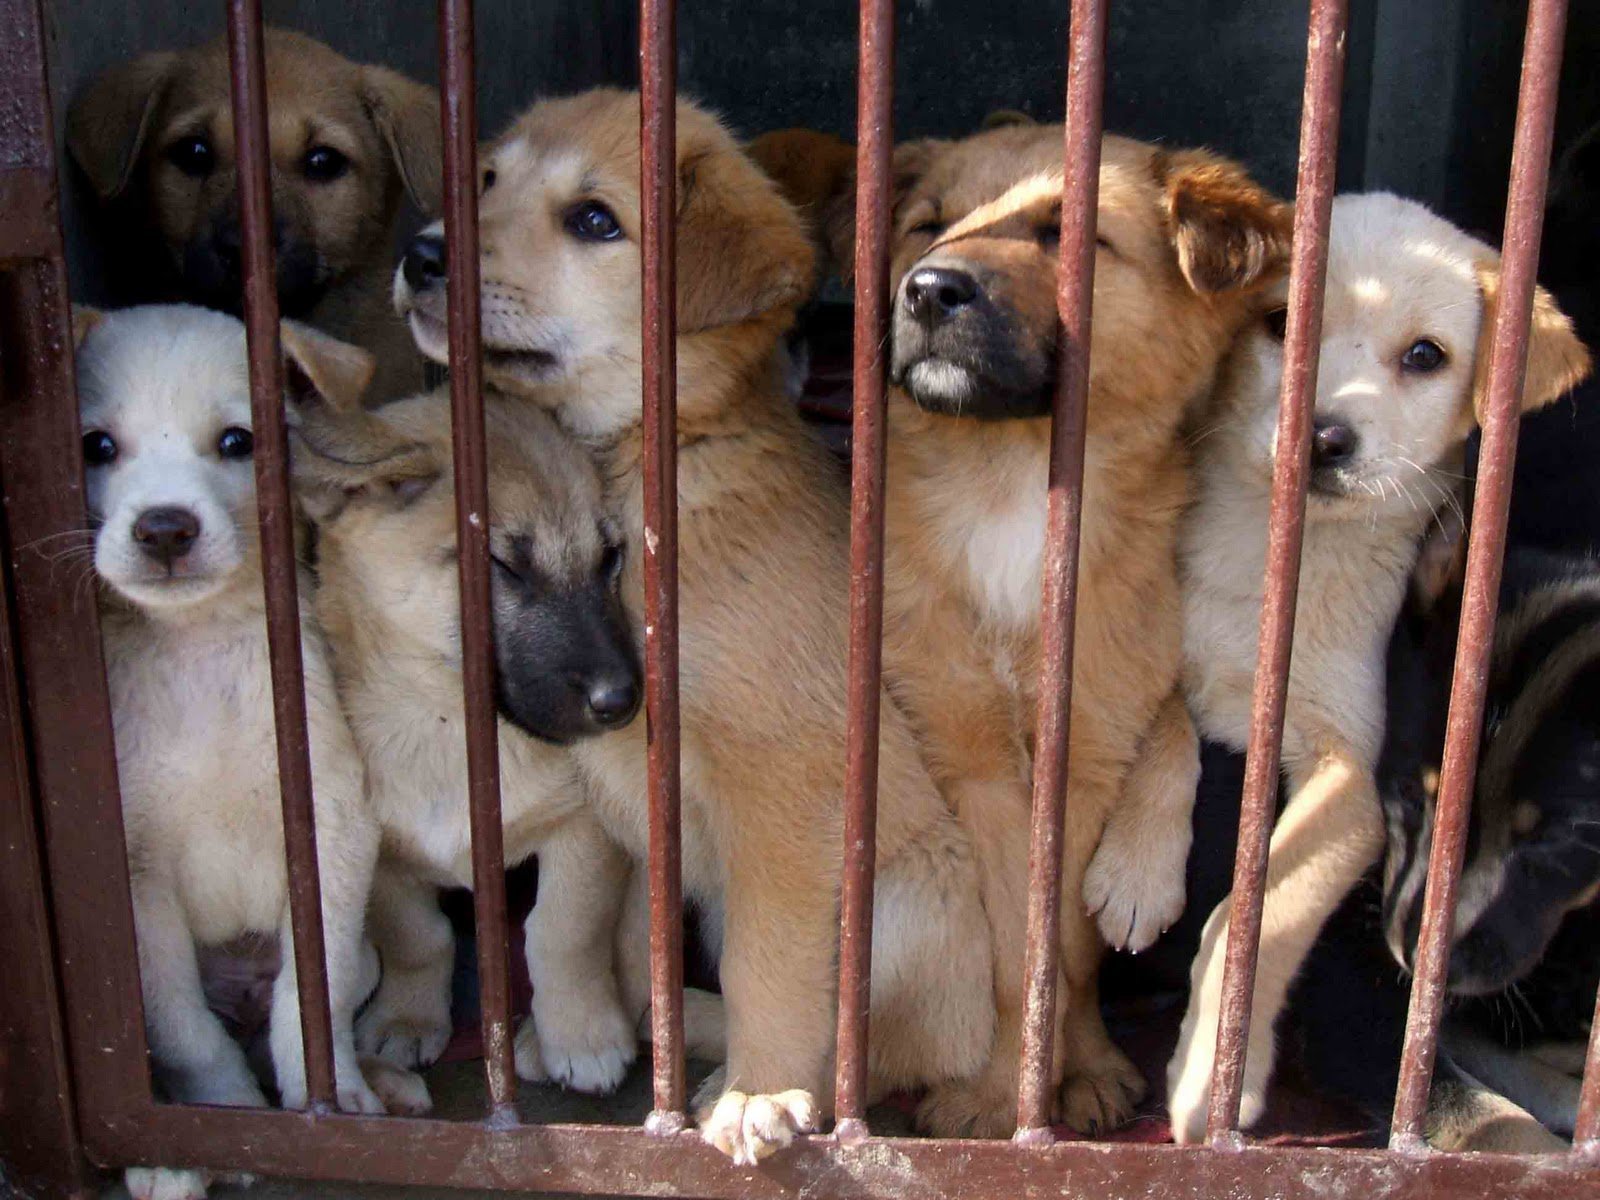 end-animal-cruelty-the-nomore50-campaign-aims-for-harsher-punishment-and-needs-your-support